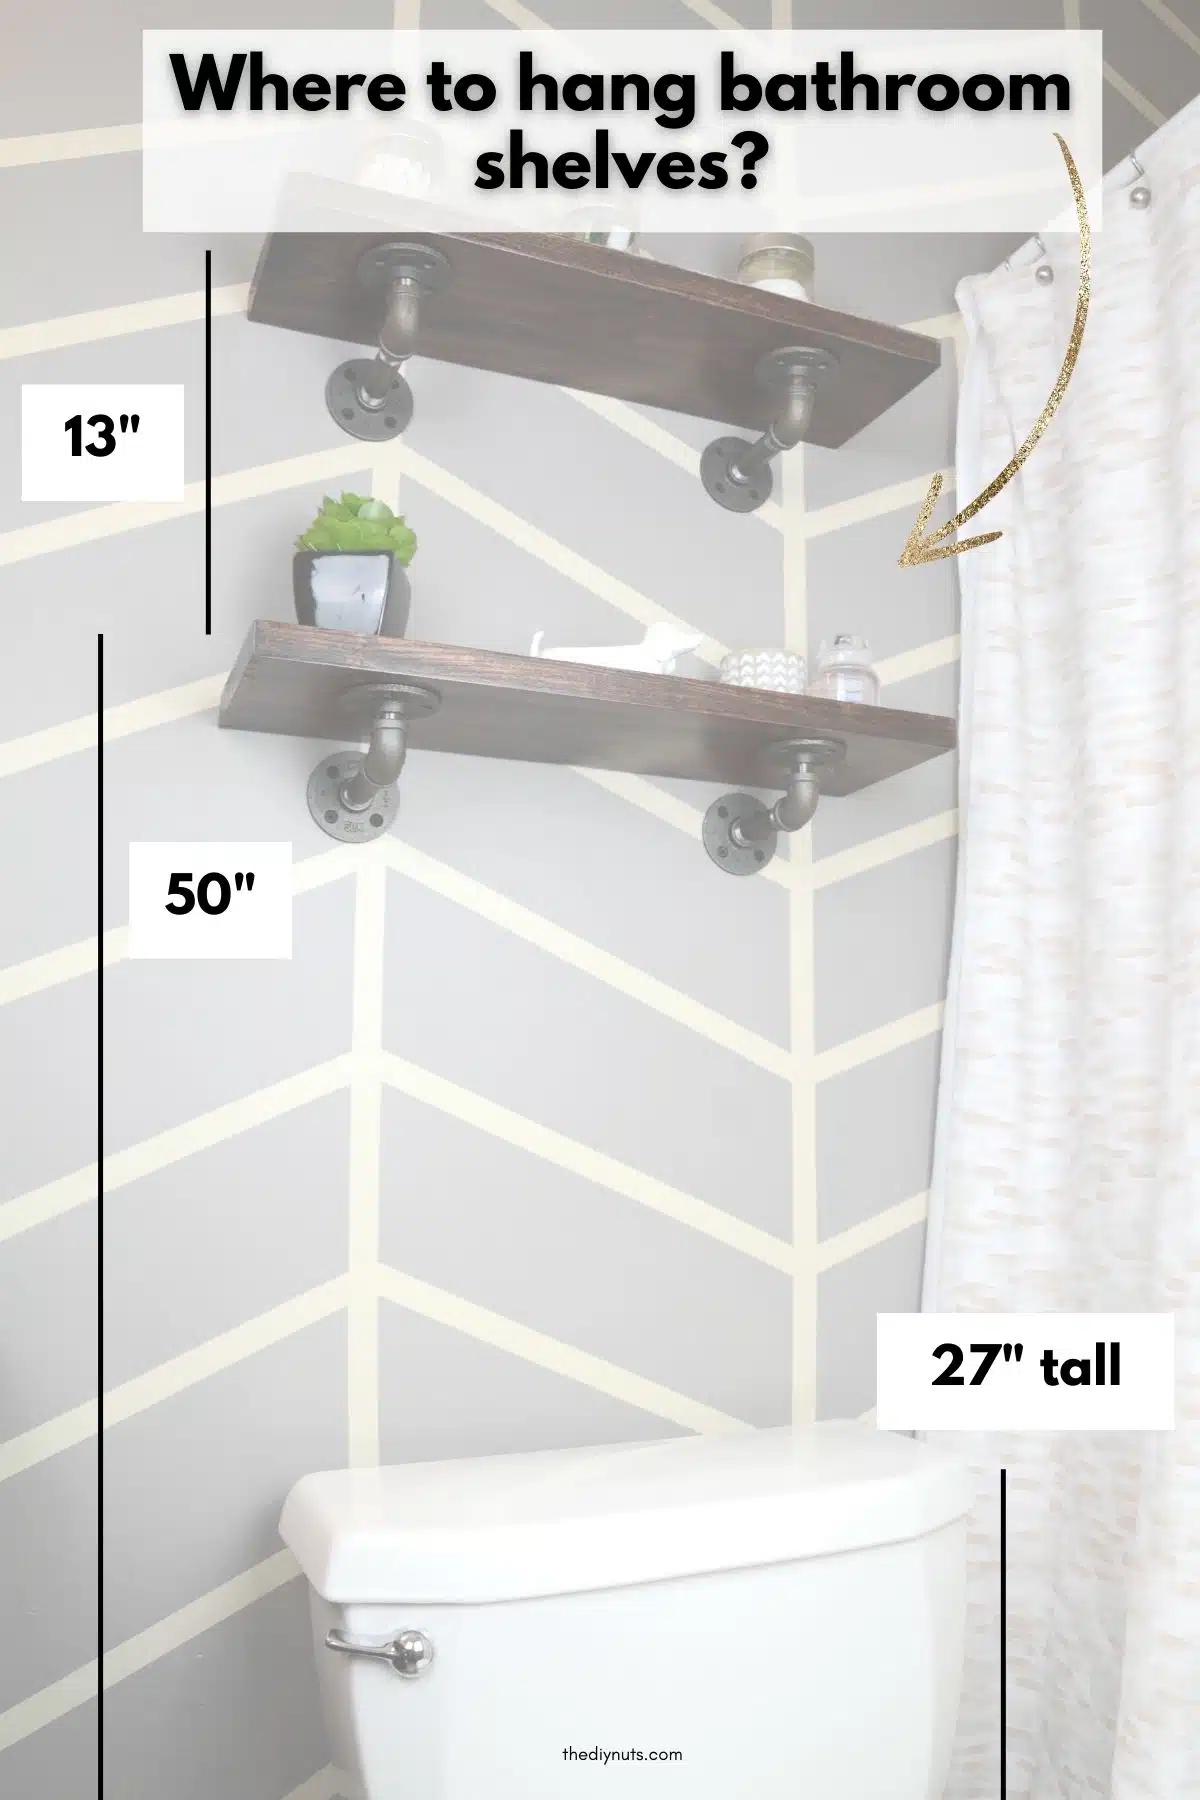 bathroom shelves on gray painted wall above toilet with text Where to hang bathroom shelves? and 27", 50", 13".